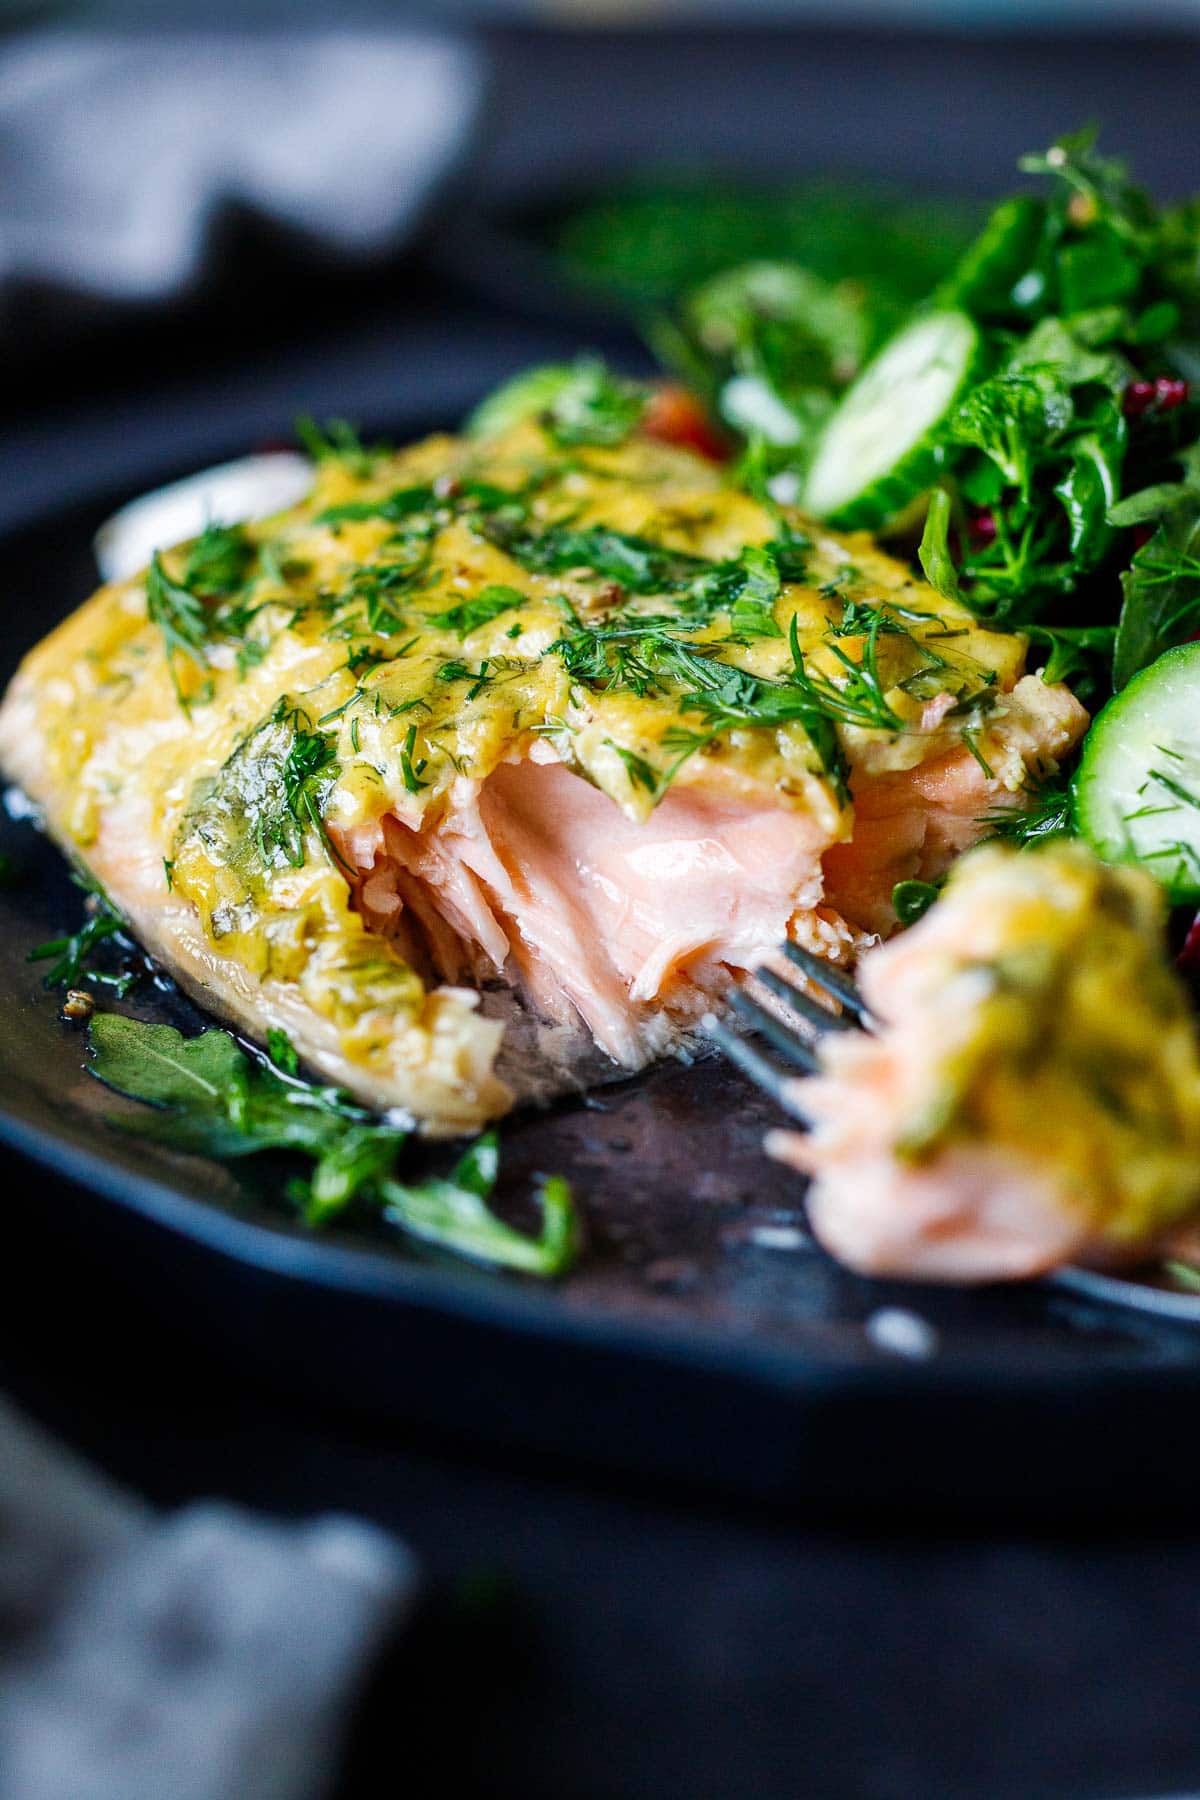 baked dijon salmon on plate, showing flaky interior, topped with fresh herbs and served beside green salad.